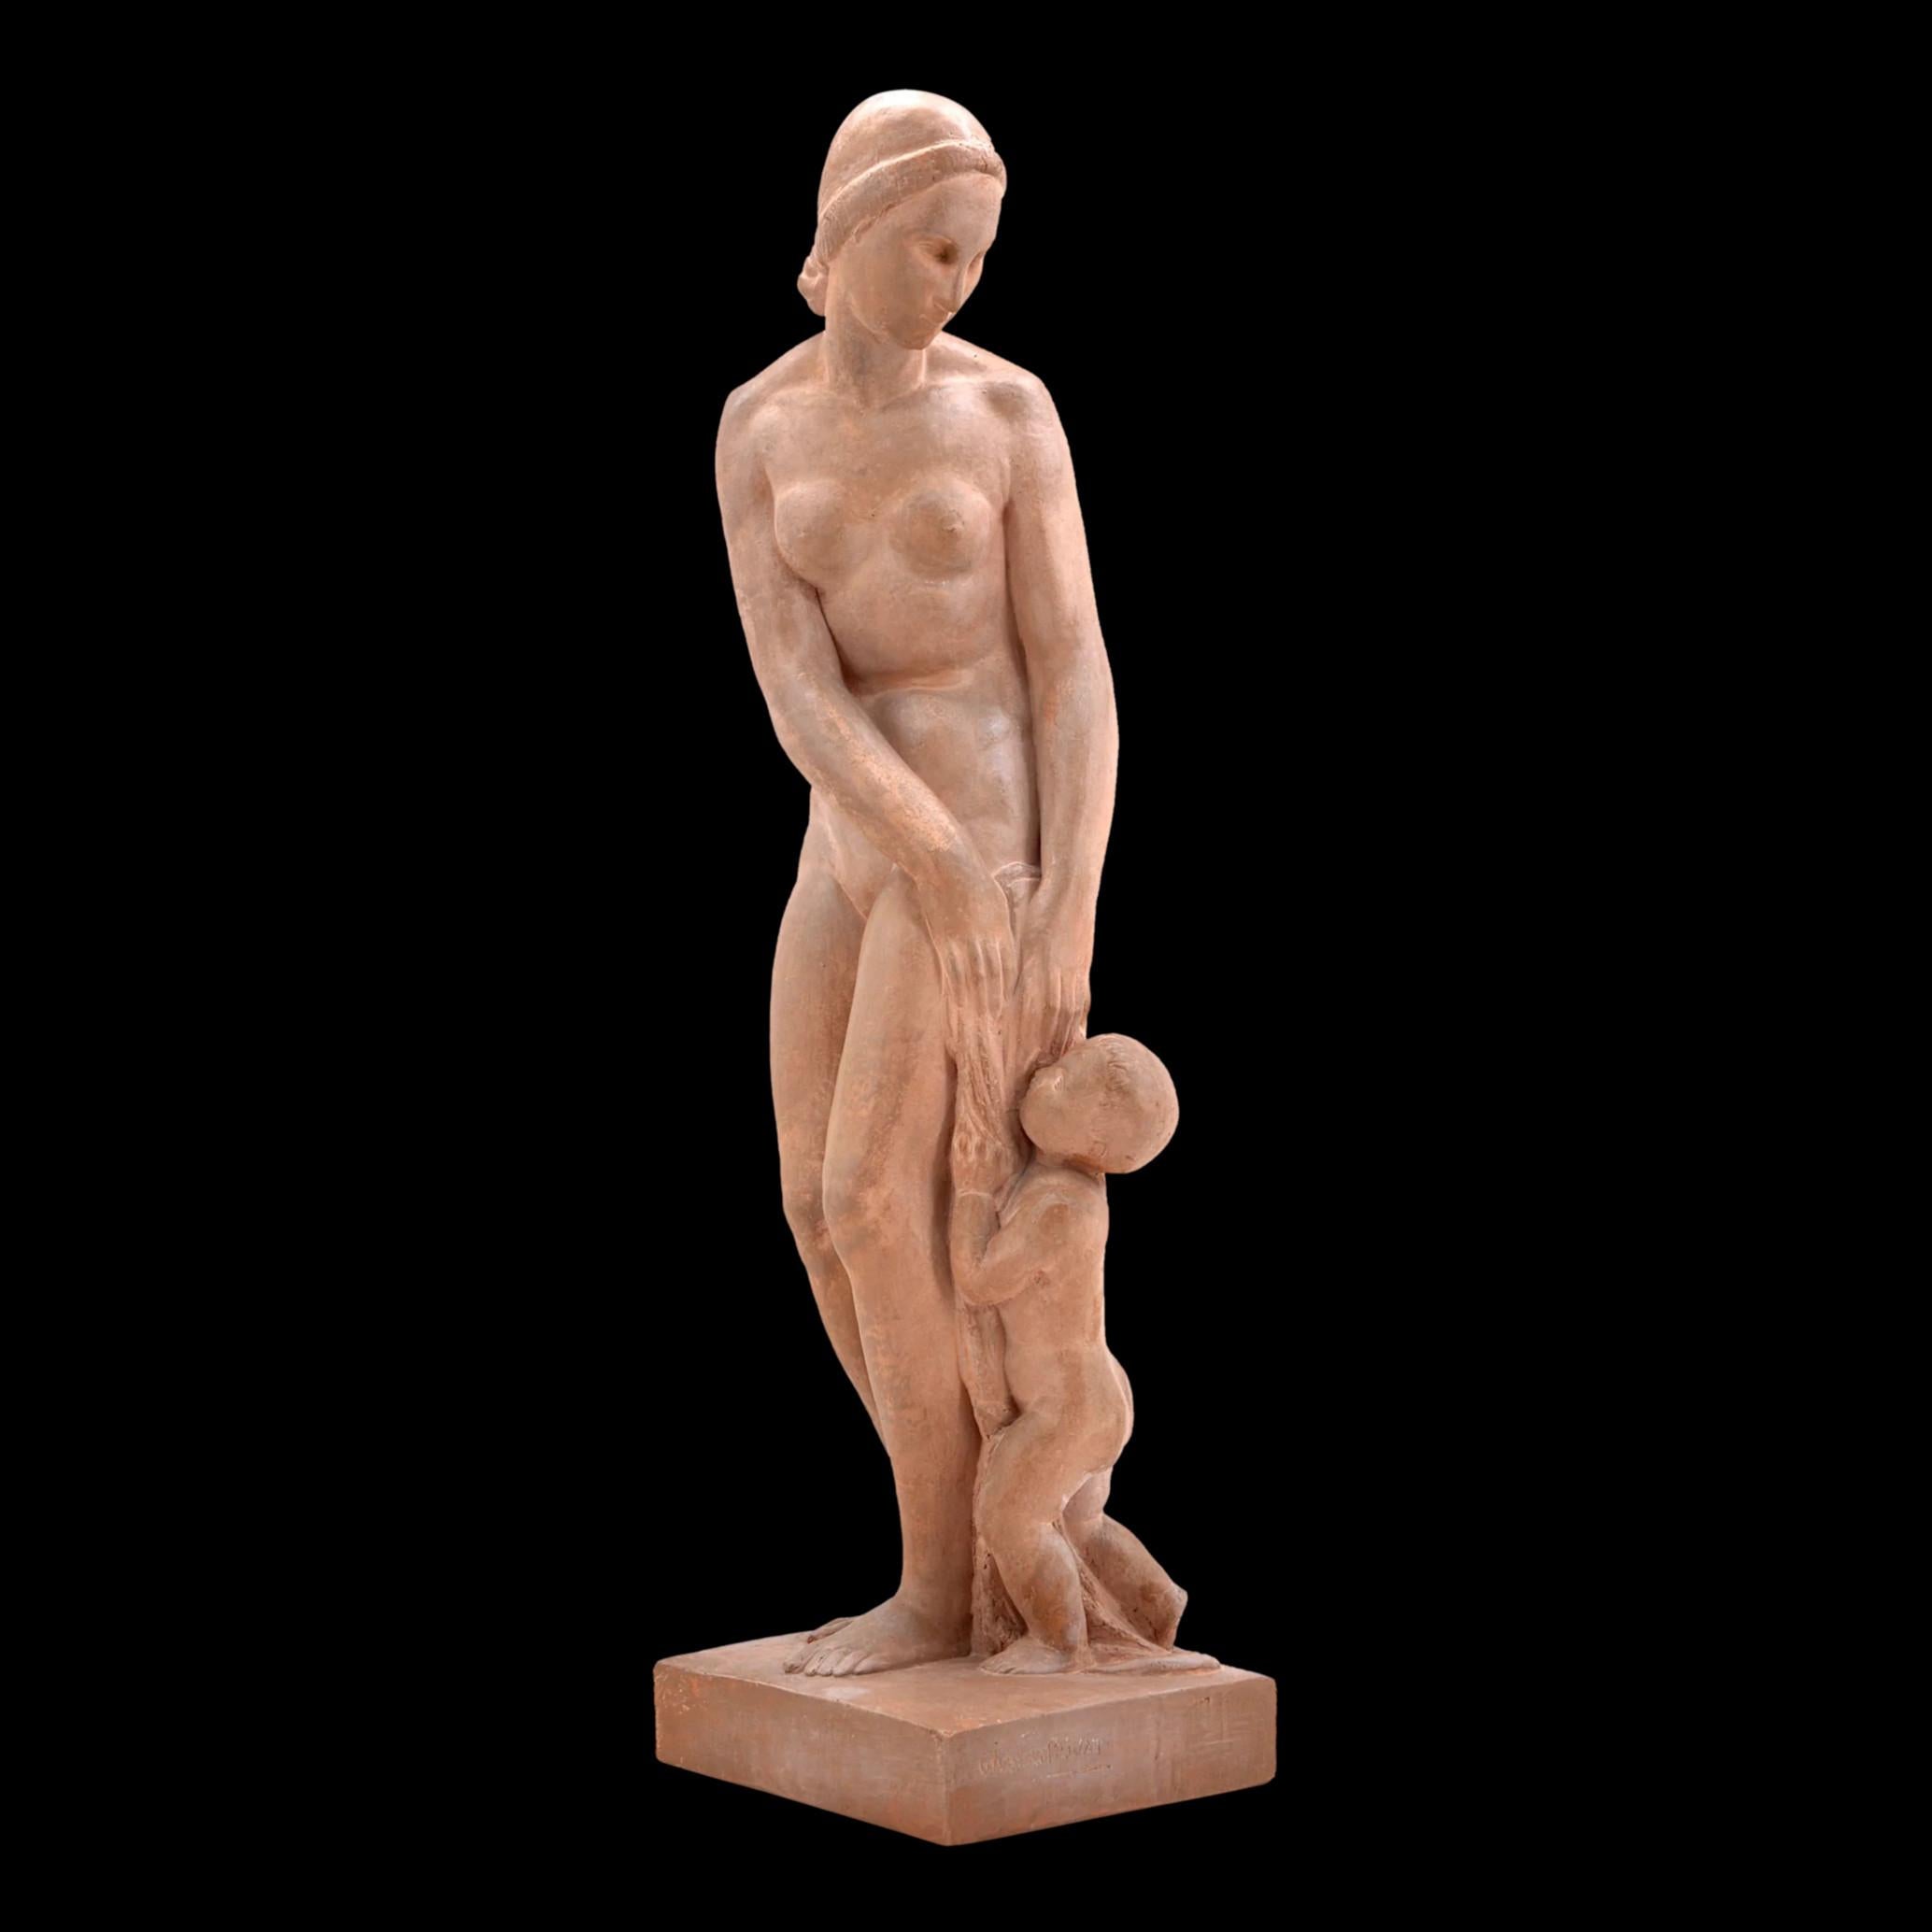 Large terracotta sculpture by Auguste Gilbert Privat (1892-1969), 1920s, France. Bather with a child. Measures: H 64.4 cm, 25.4 in, W 18.8 cm, 7.4 in, D 16.7 cm, 6.6 in. Signed on the right side of the base 